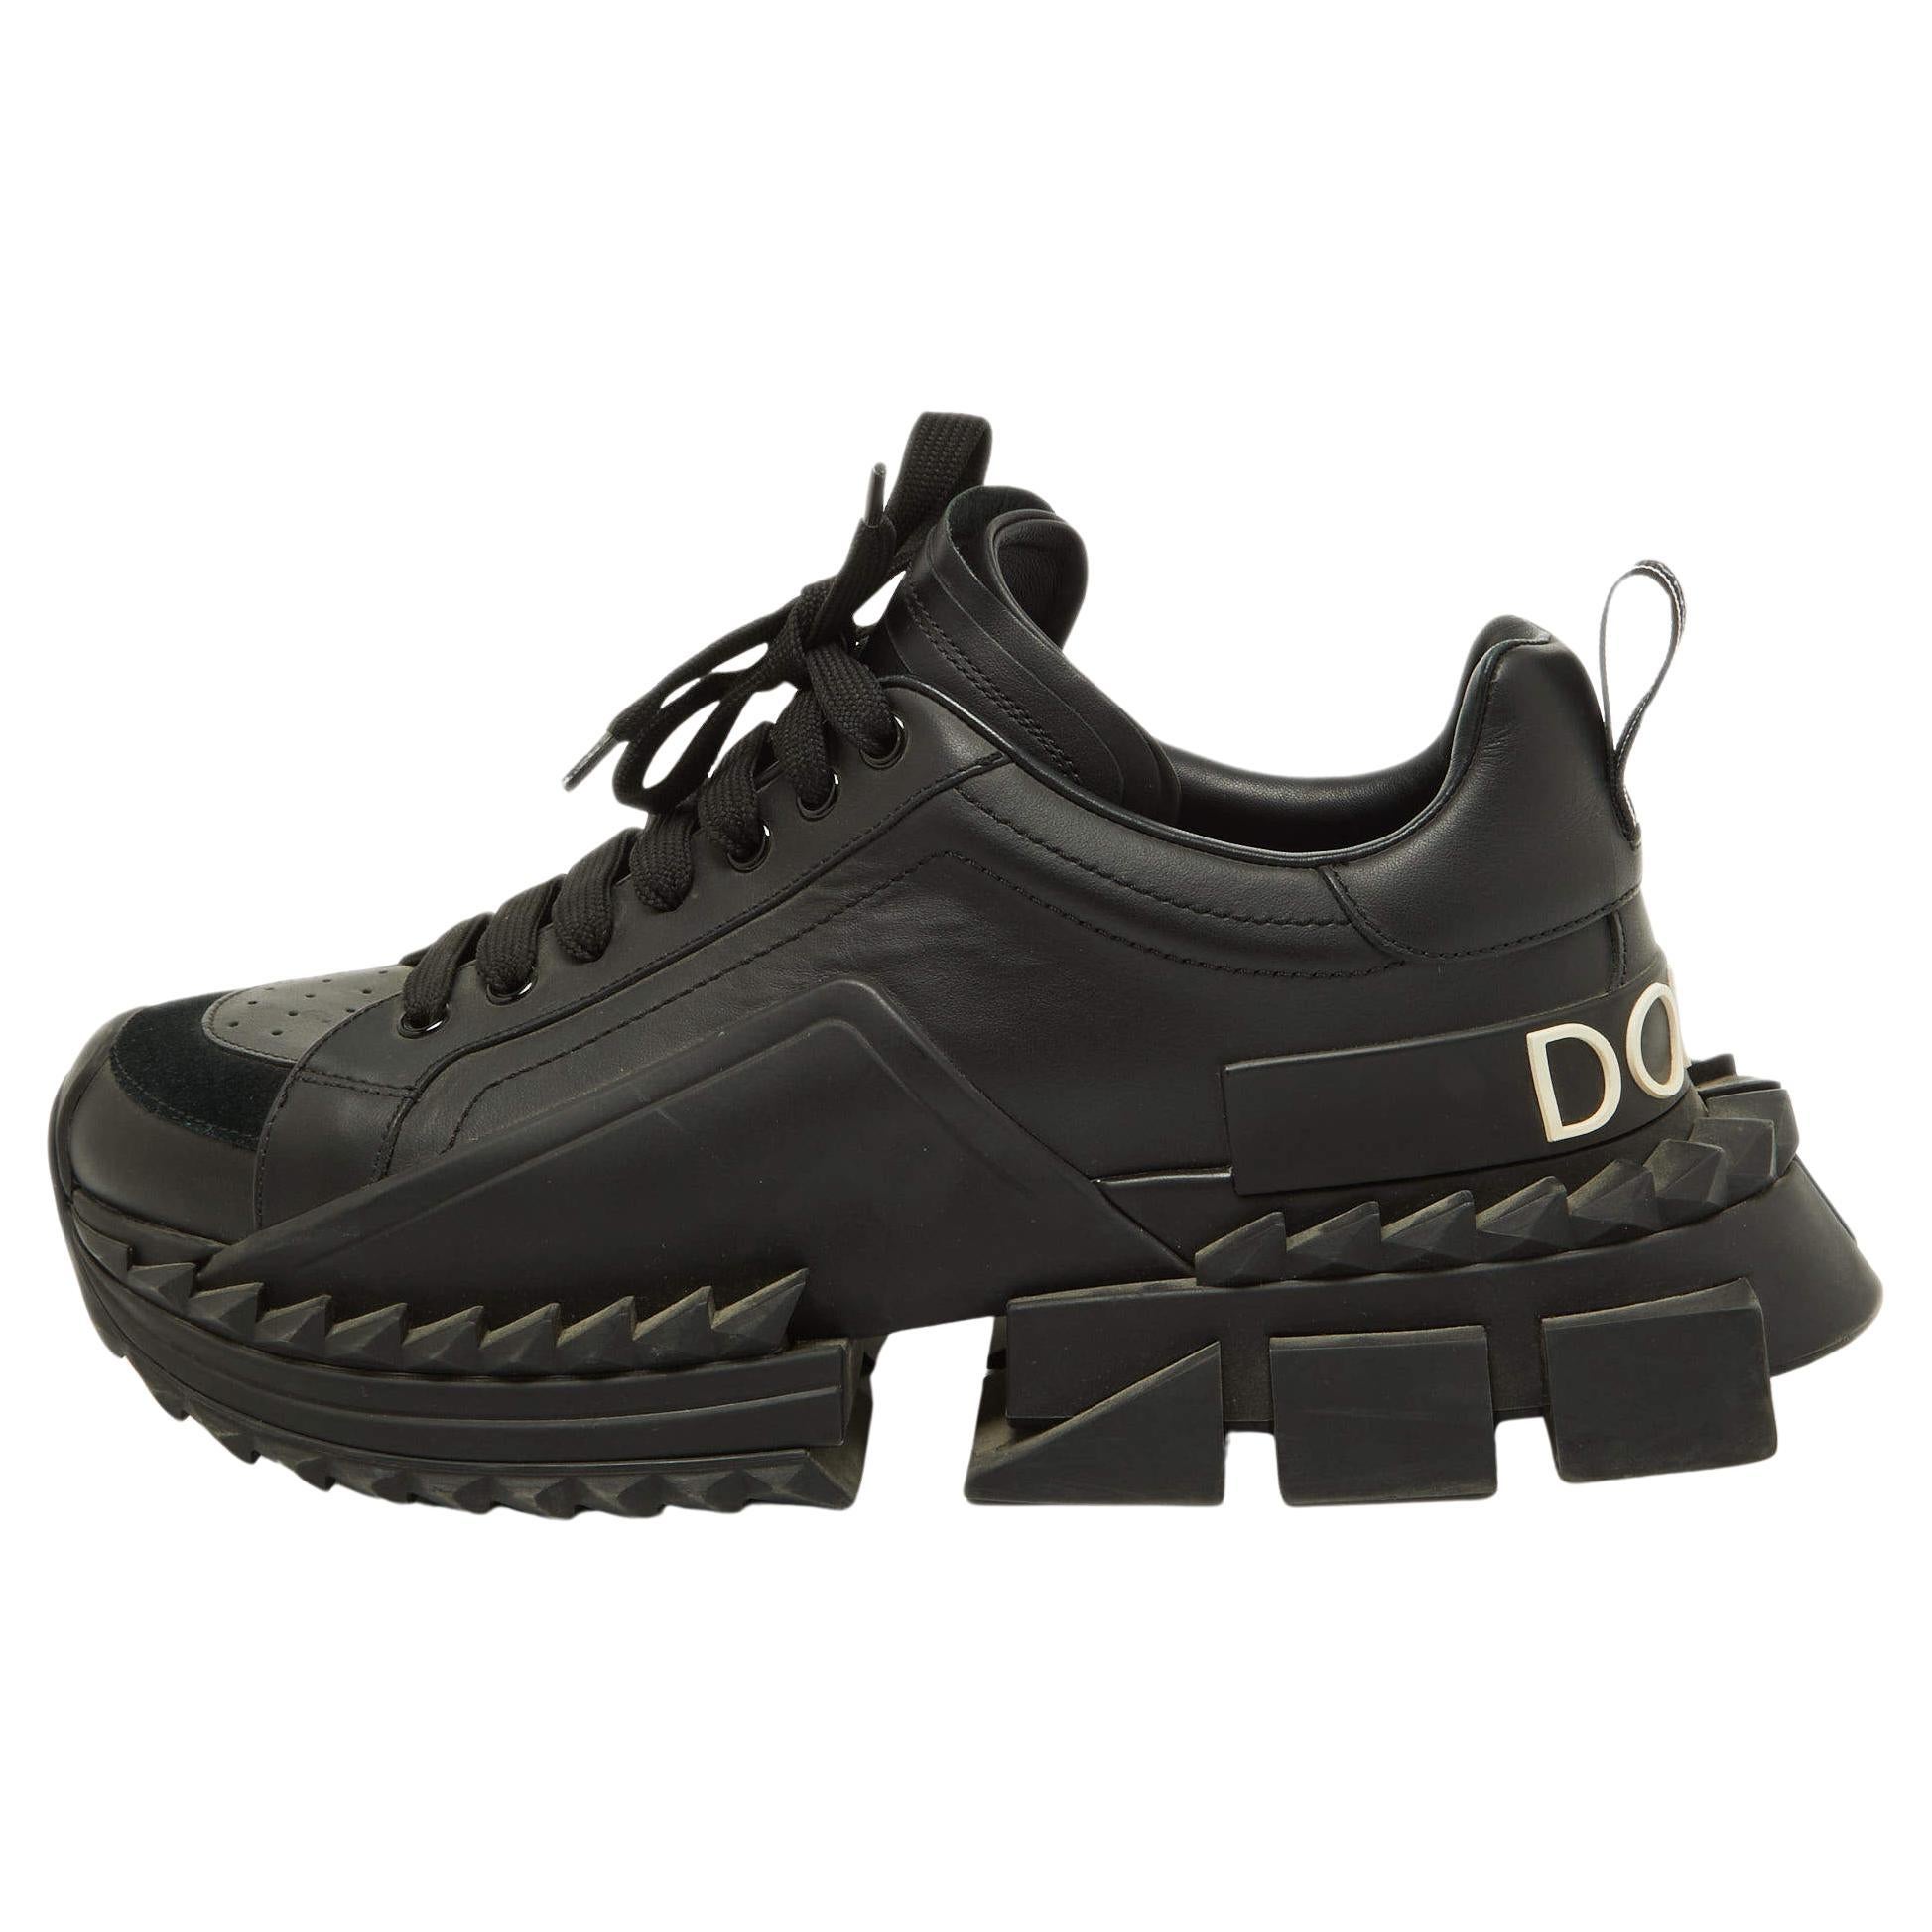 Dolce & Gabbana Black Leather Super King Sneakers Size 42.5